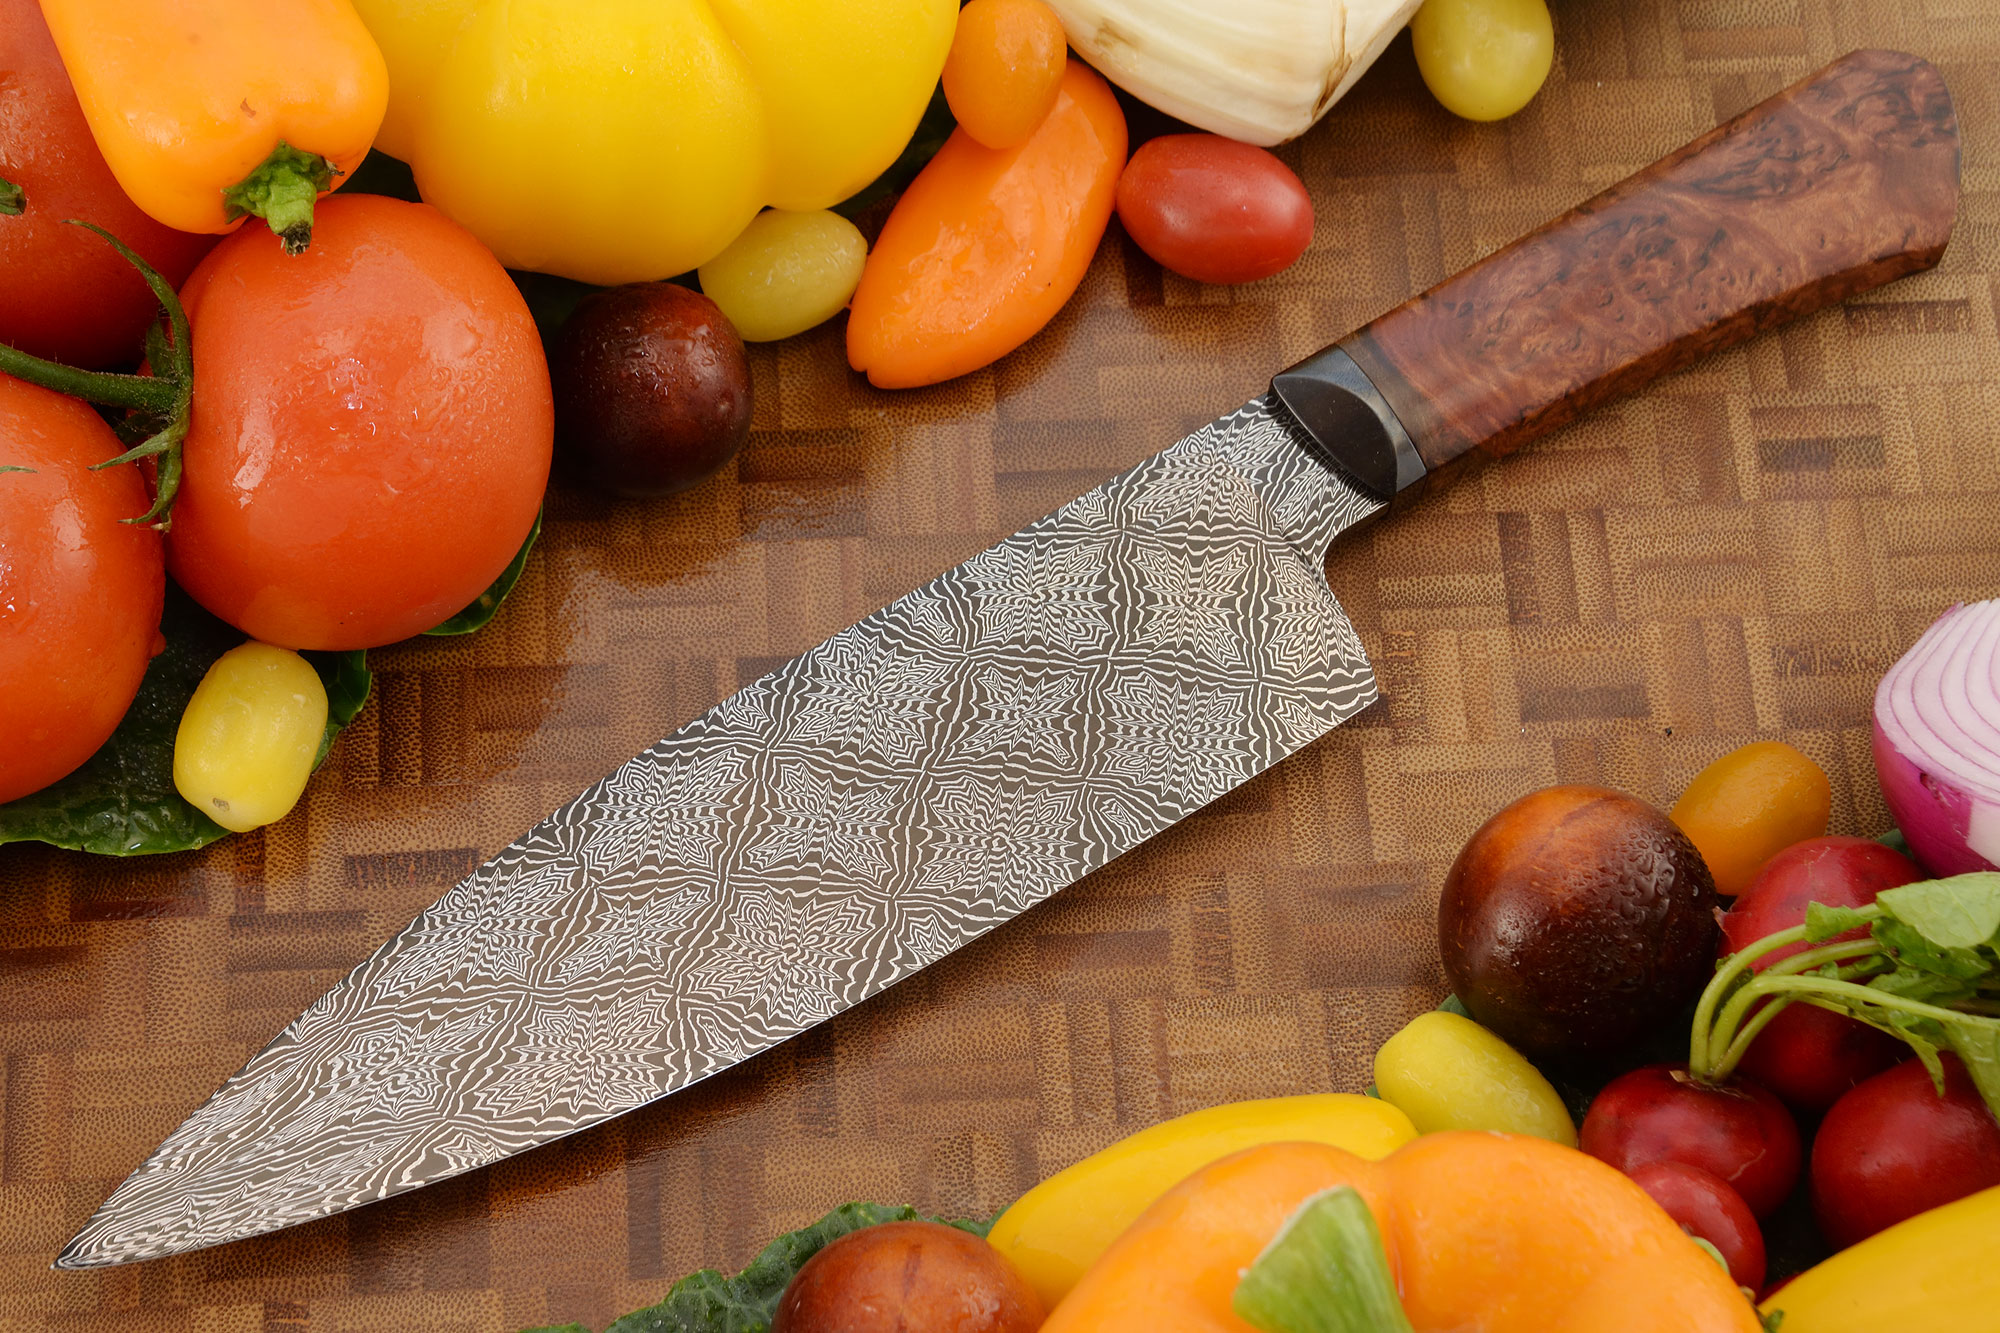 Damascus Chef Knives